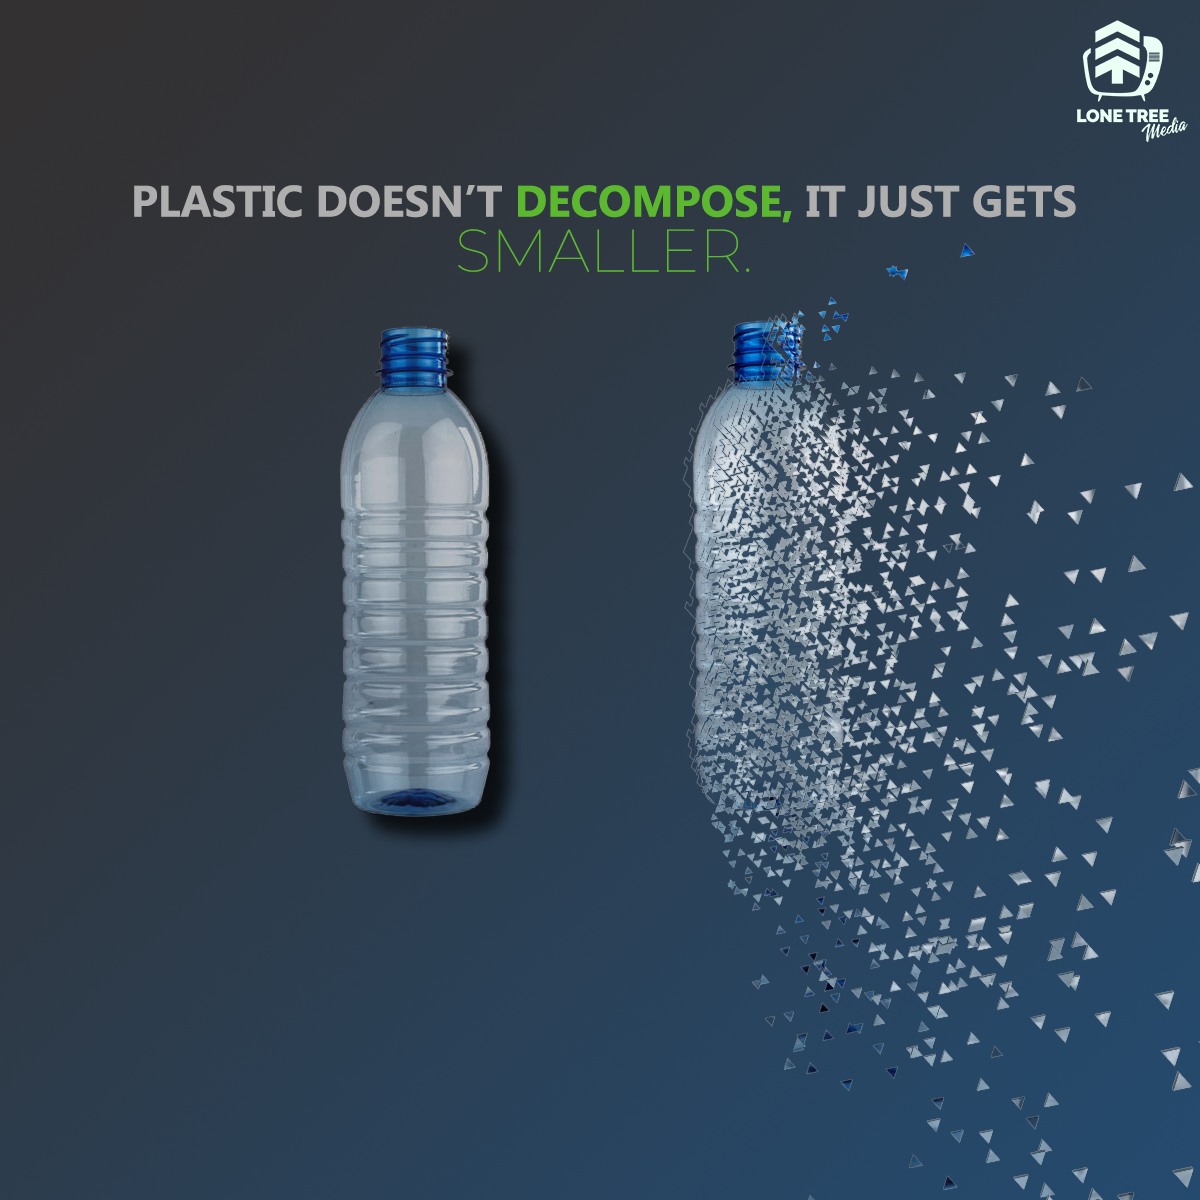 Plastic Doesn't Decompose, It Just Gets Smaller. Plastic bottles